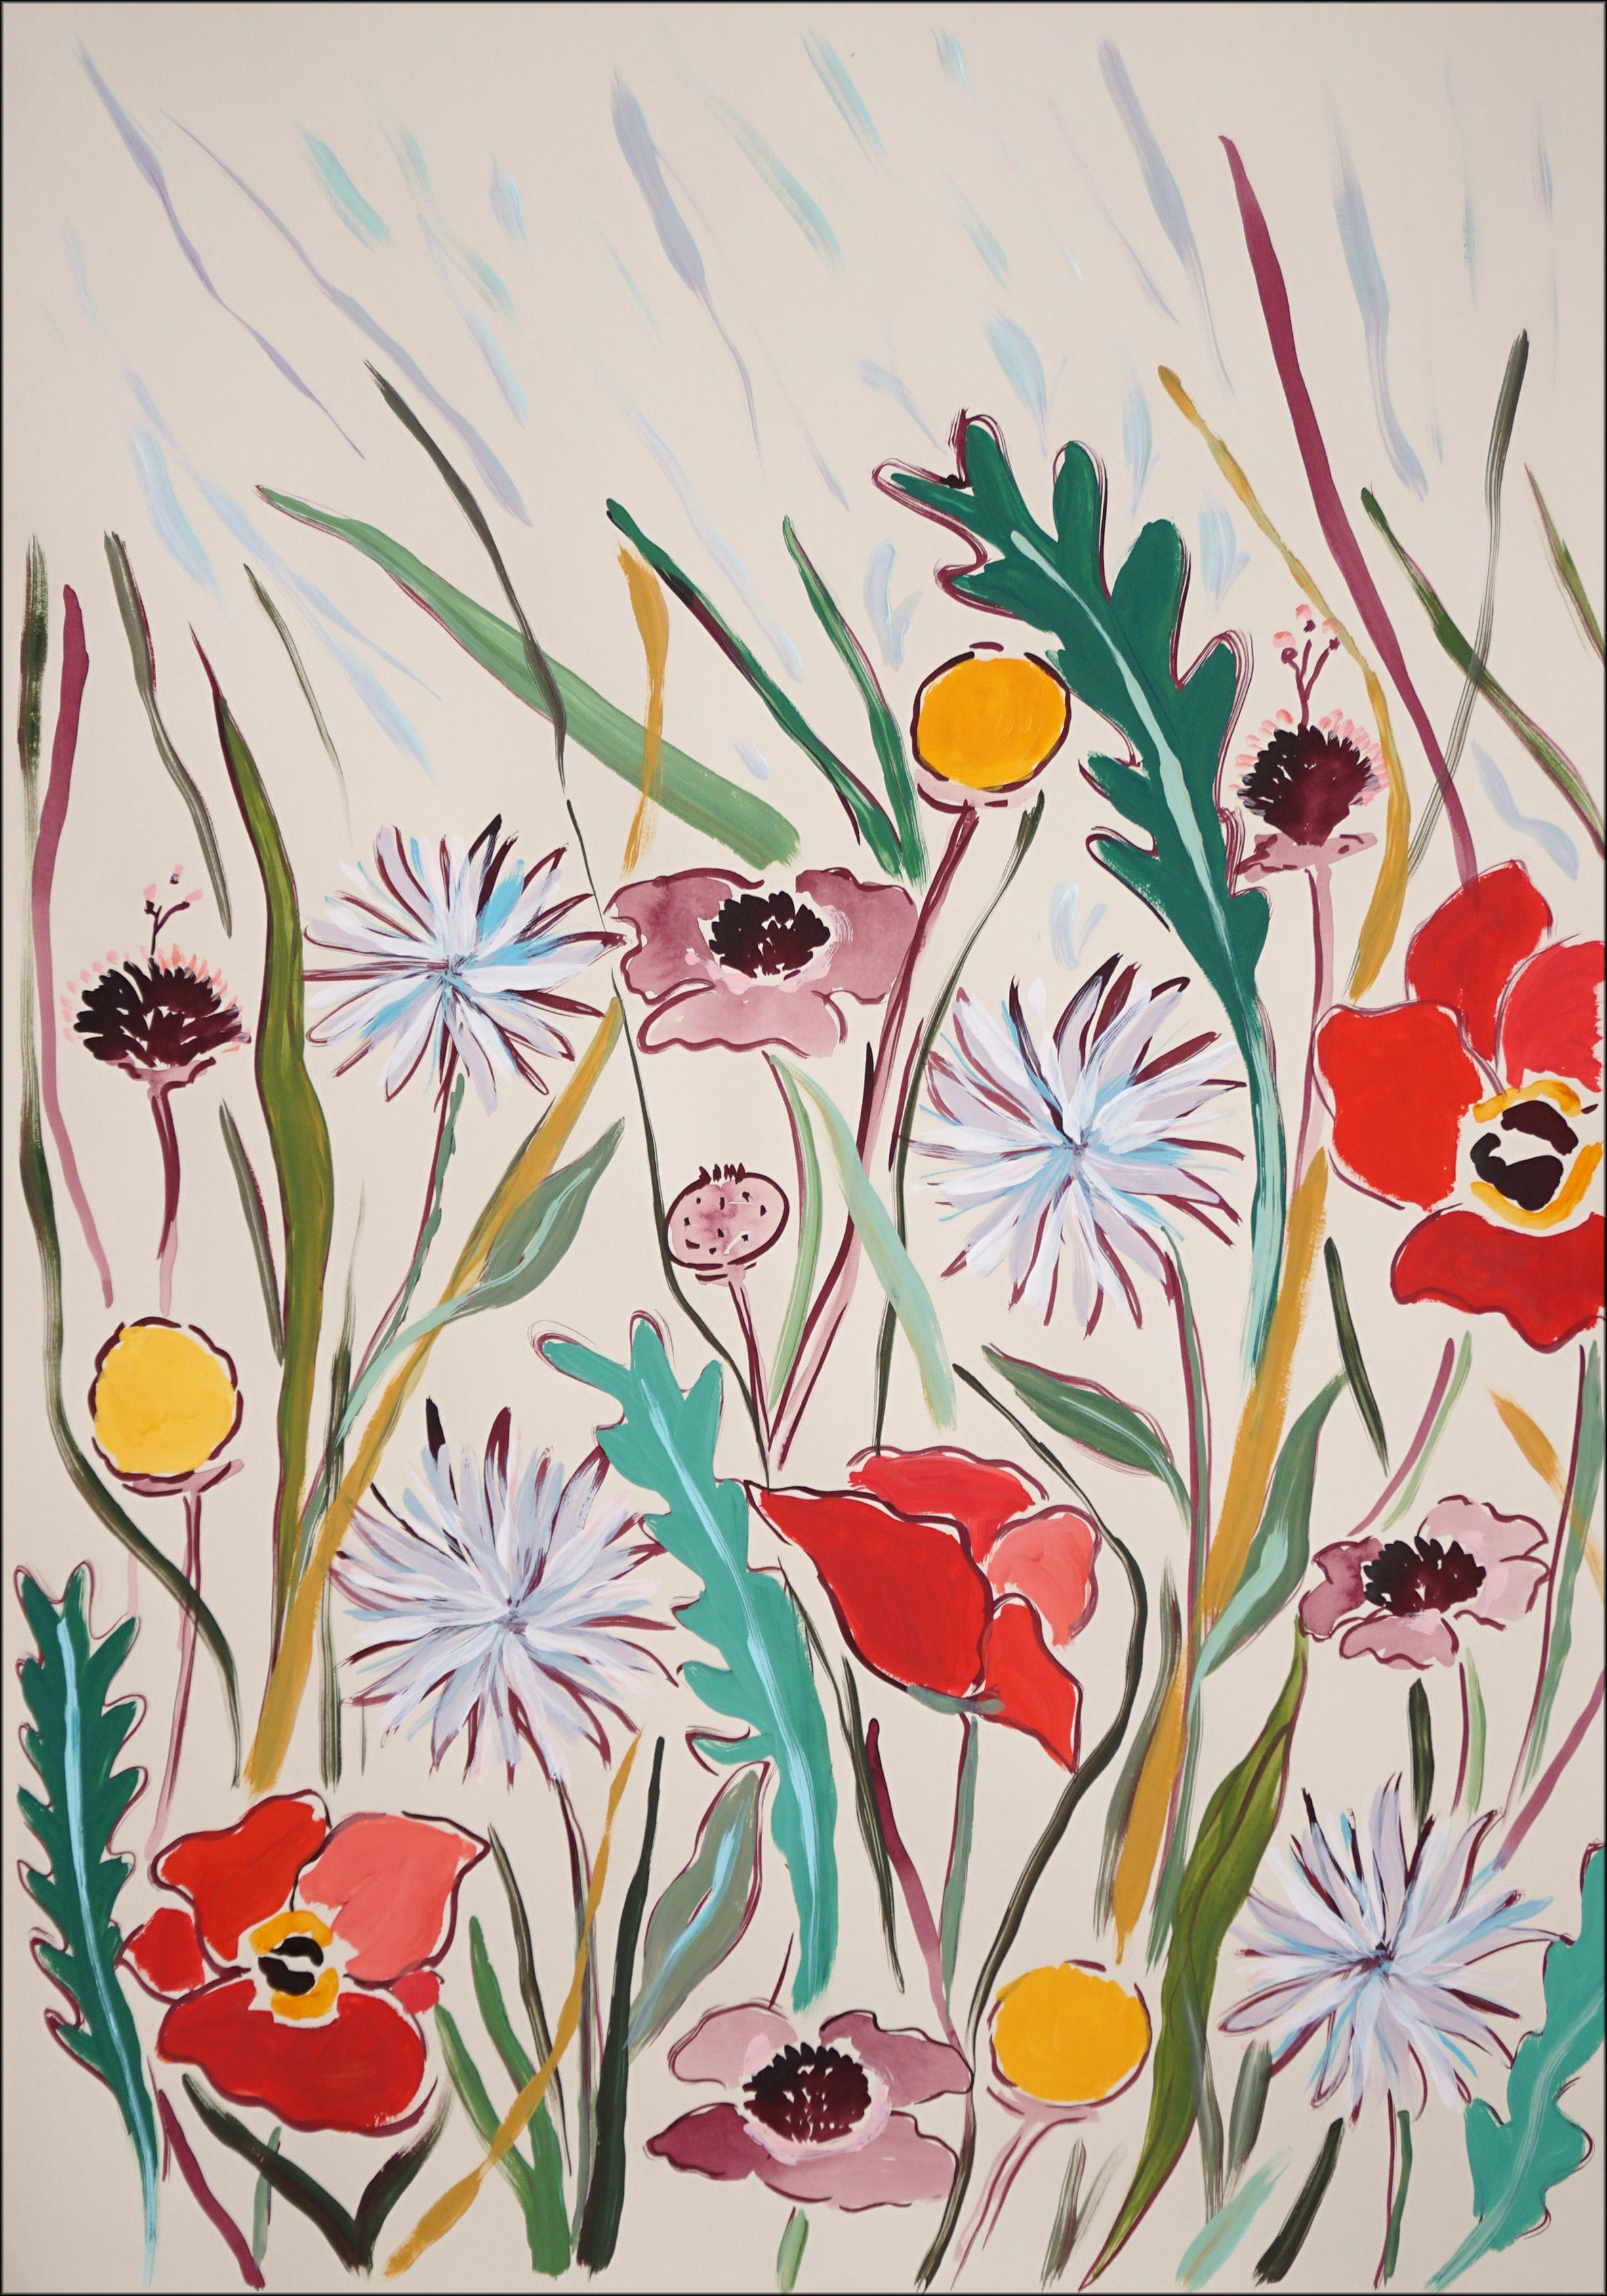 Pastel Wildflowers II, Illustration Style Diptych, Red Poppies and Dandelions  2